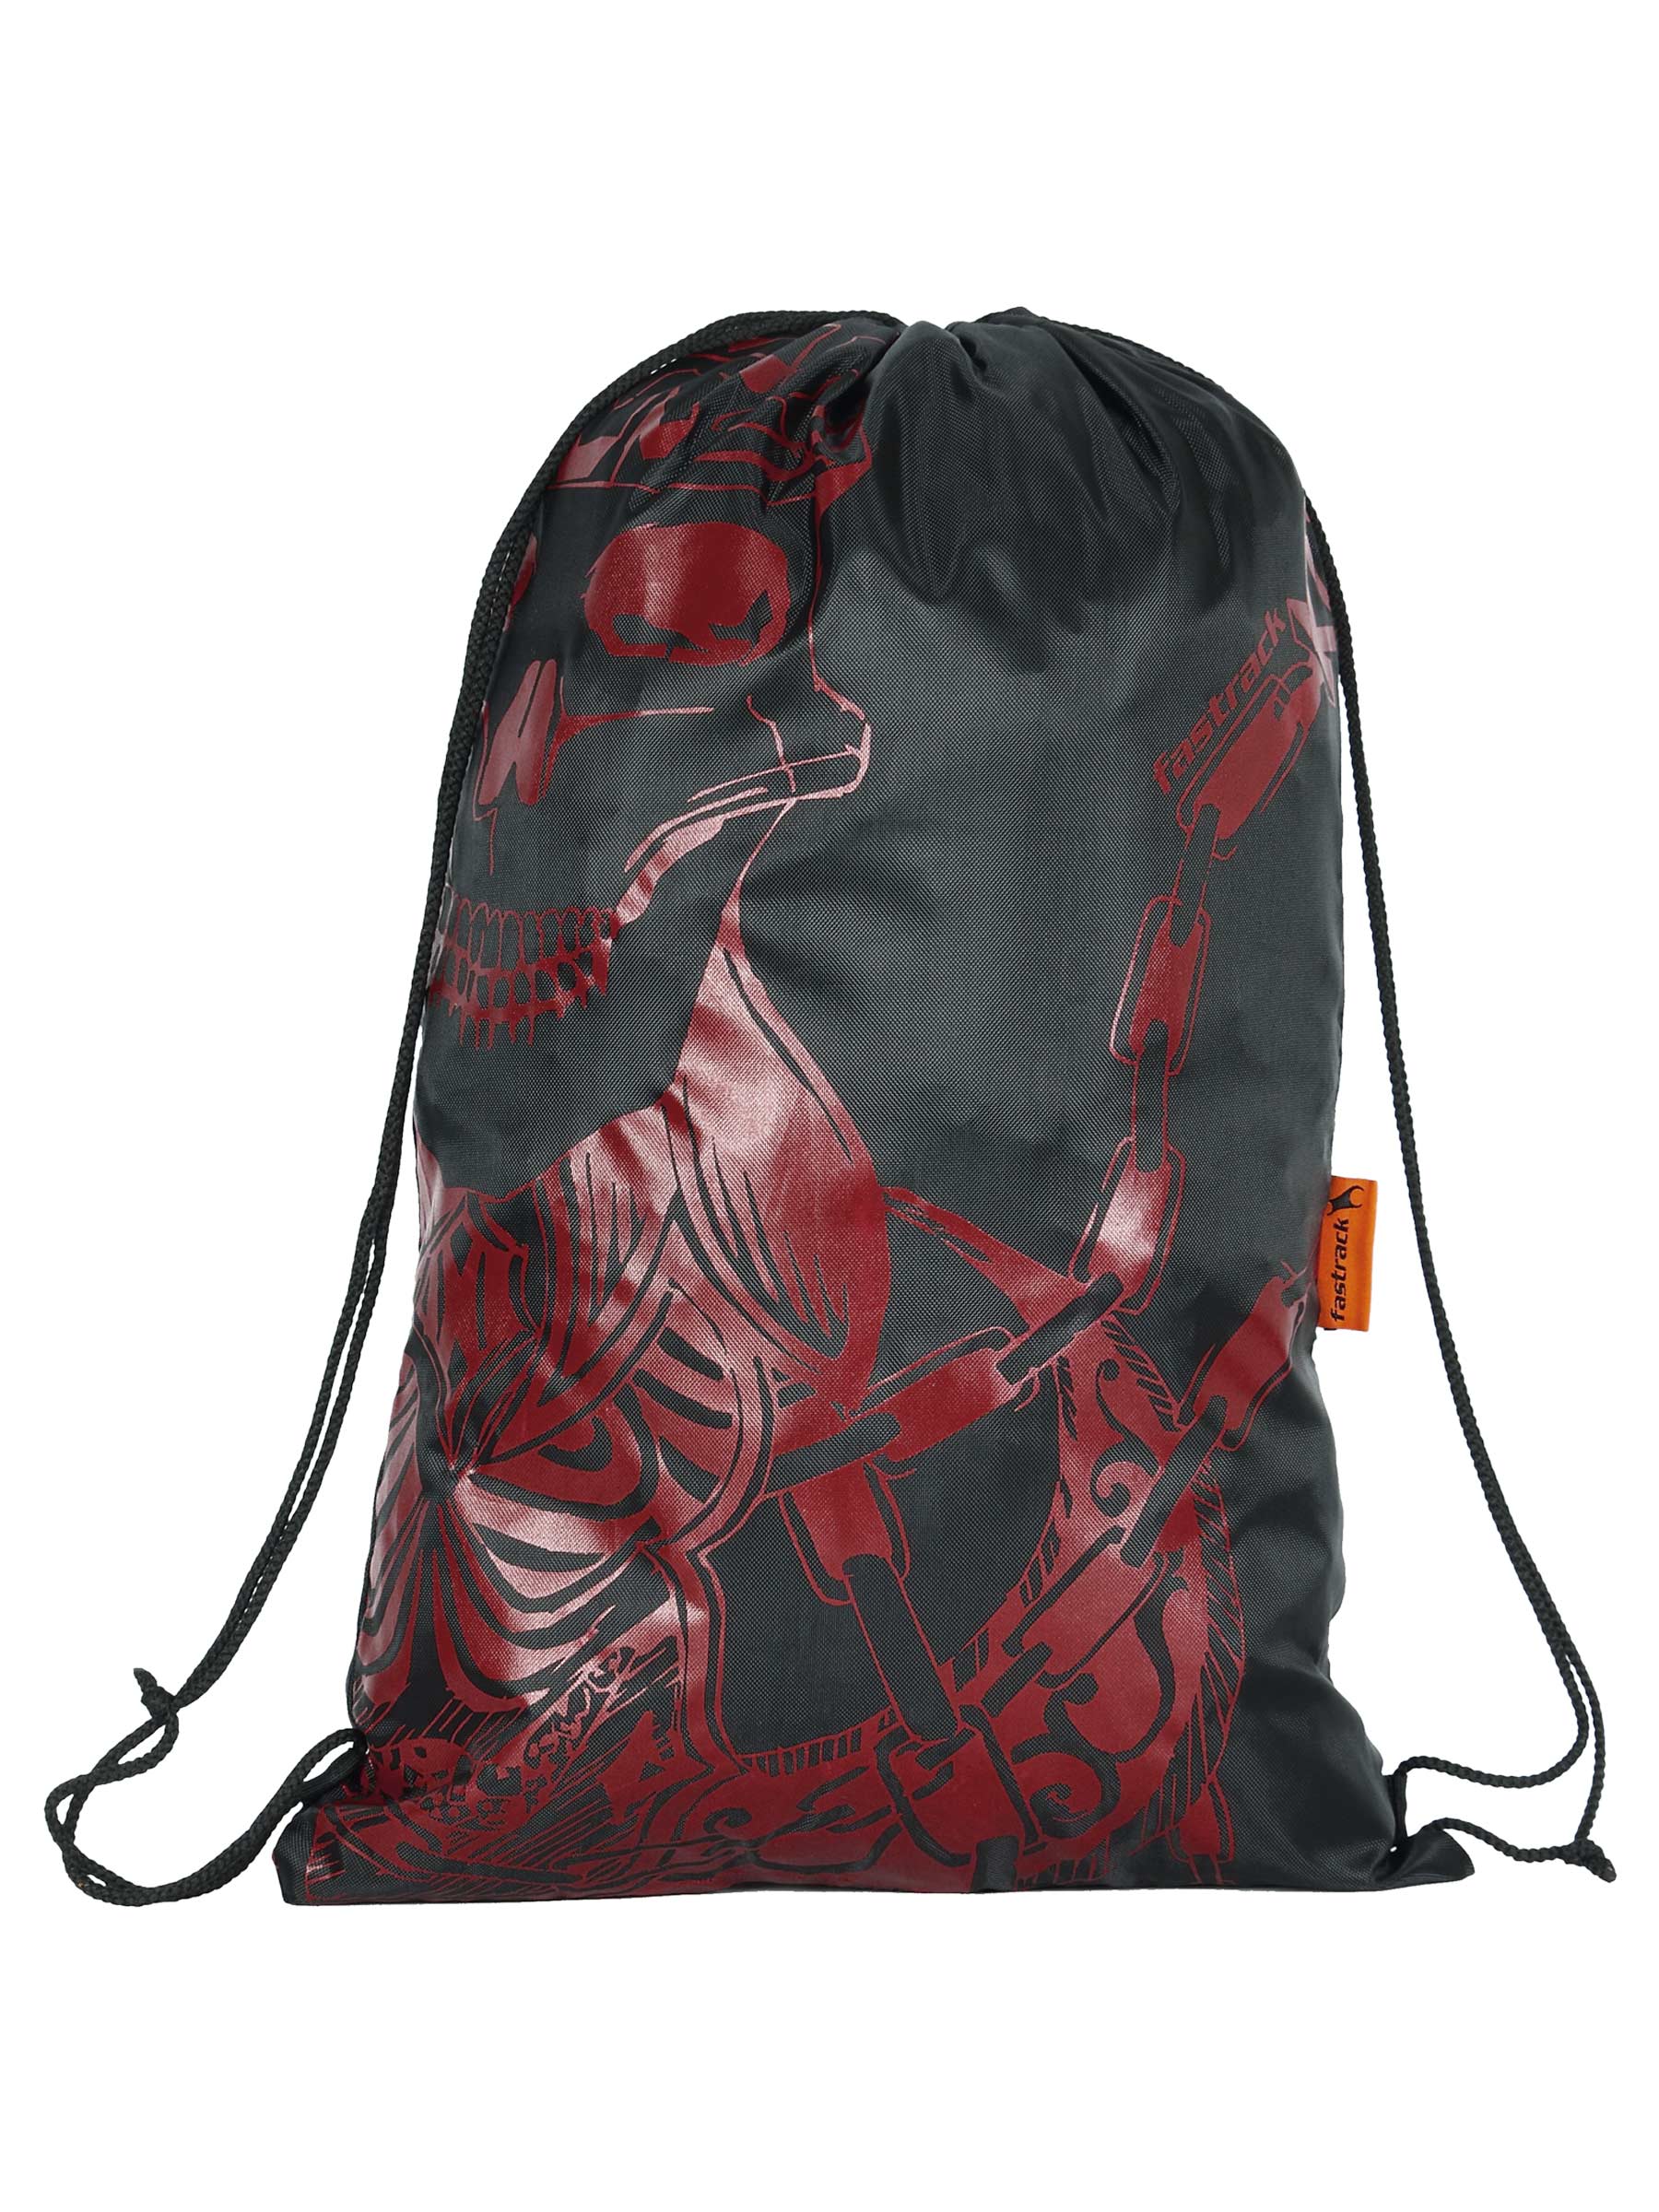 Fastrack Unisex Black & Red Graphic Backpack